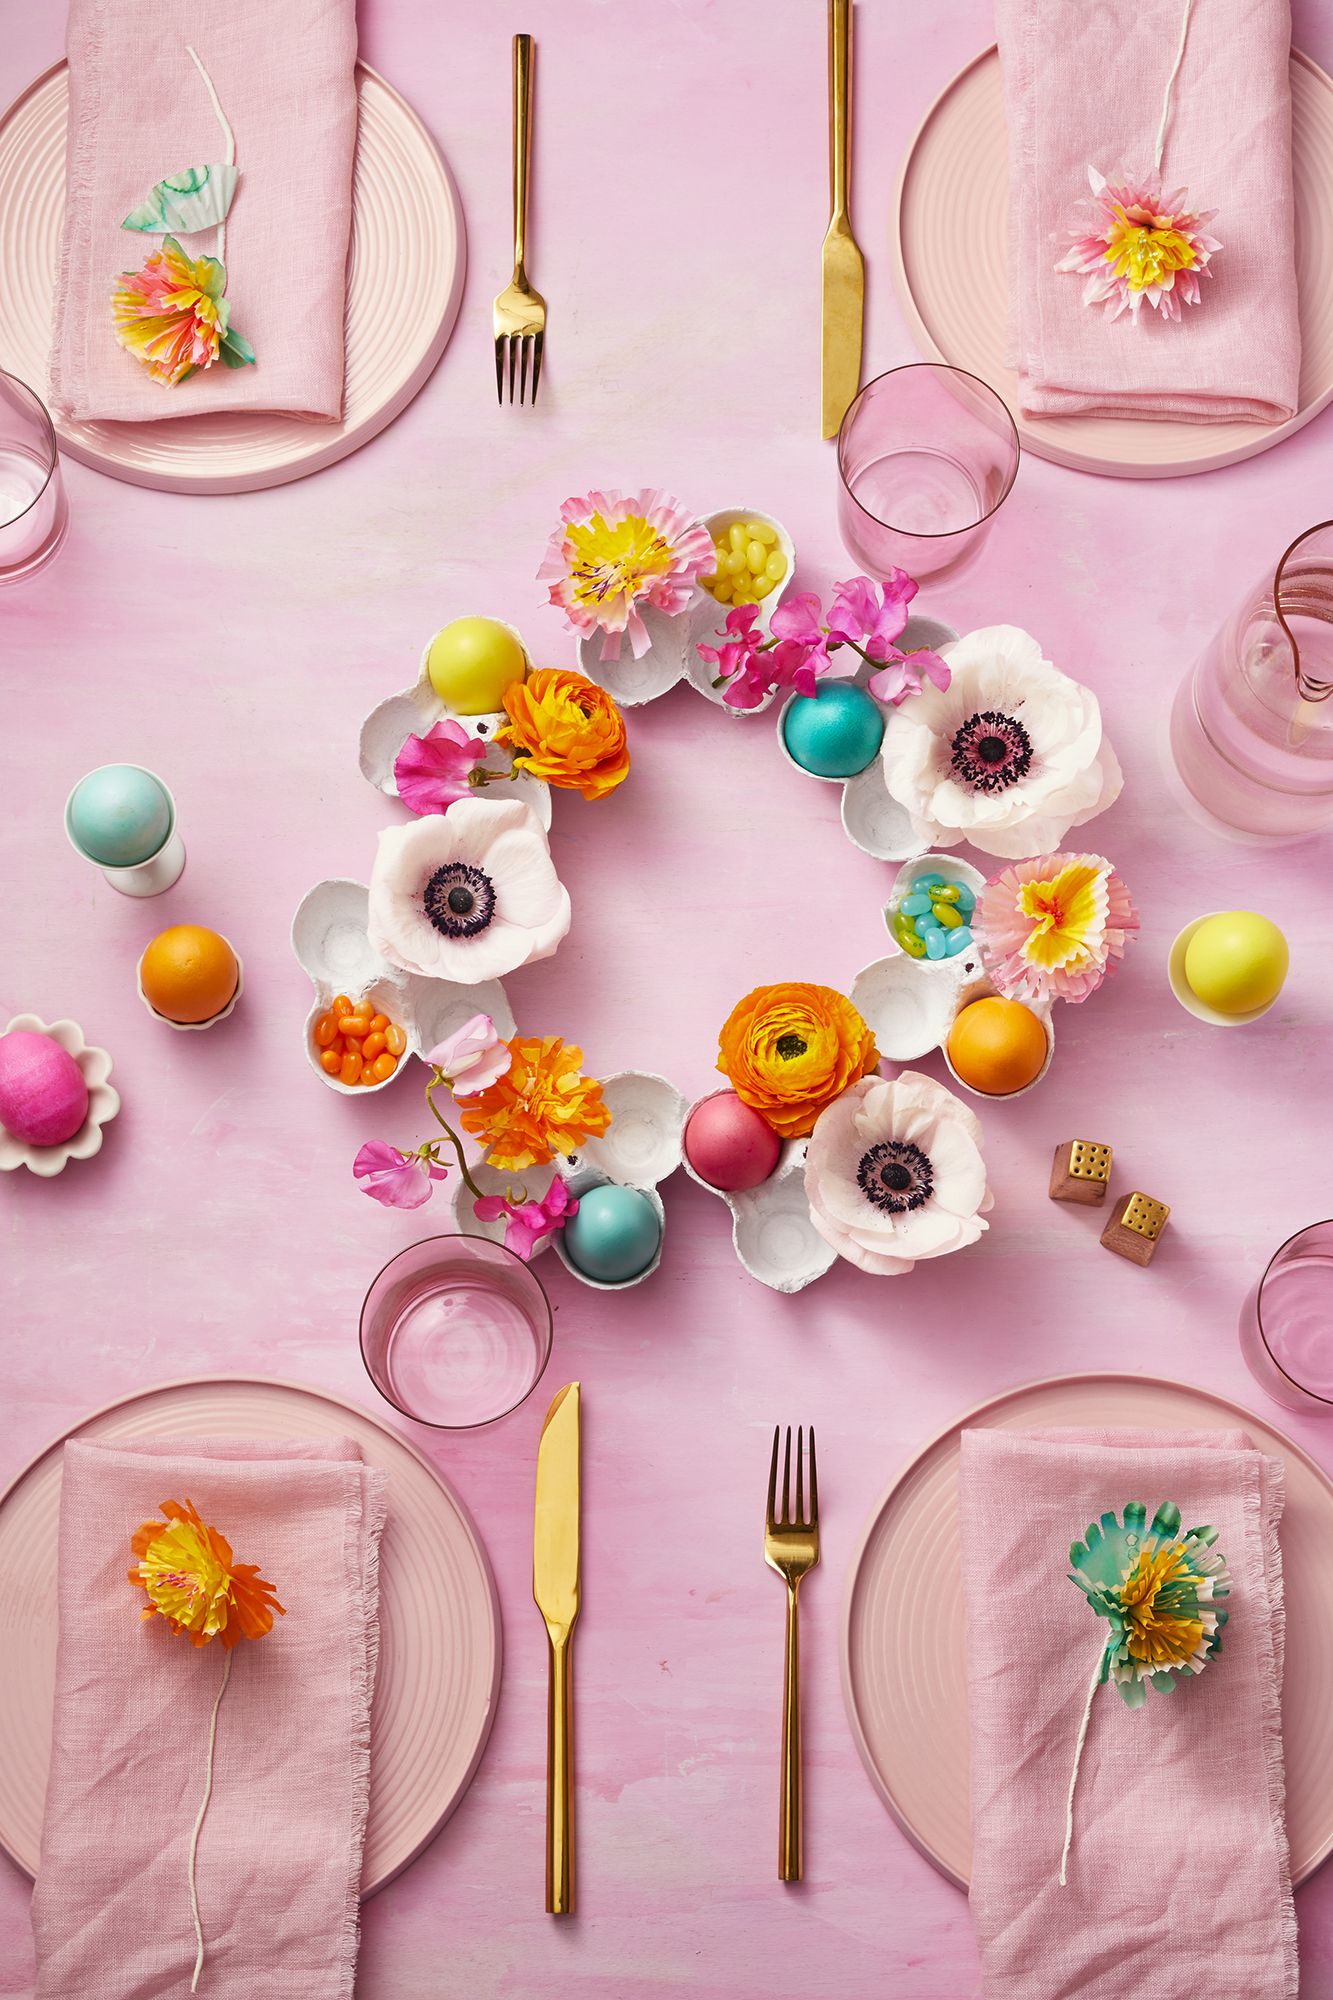 24 Spring Centerpieces To Diy Spring Centerpiece Ideas With Or Without Flowers